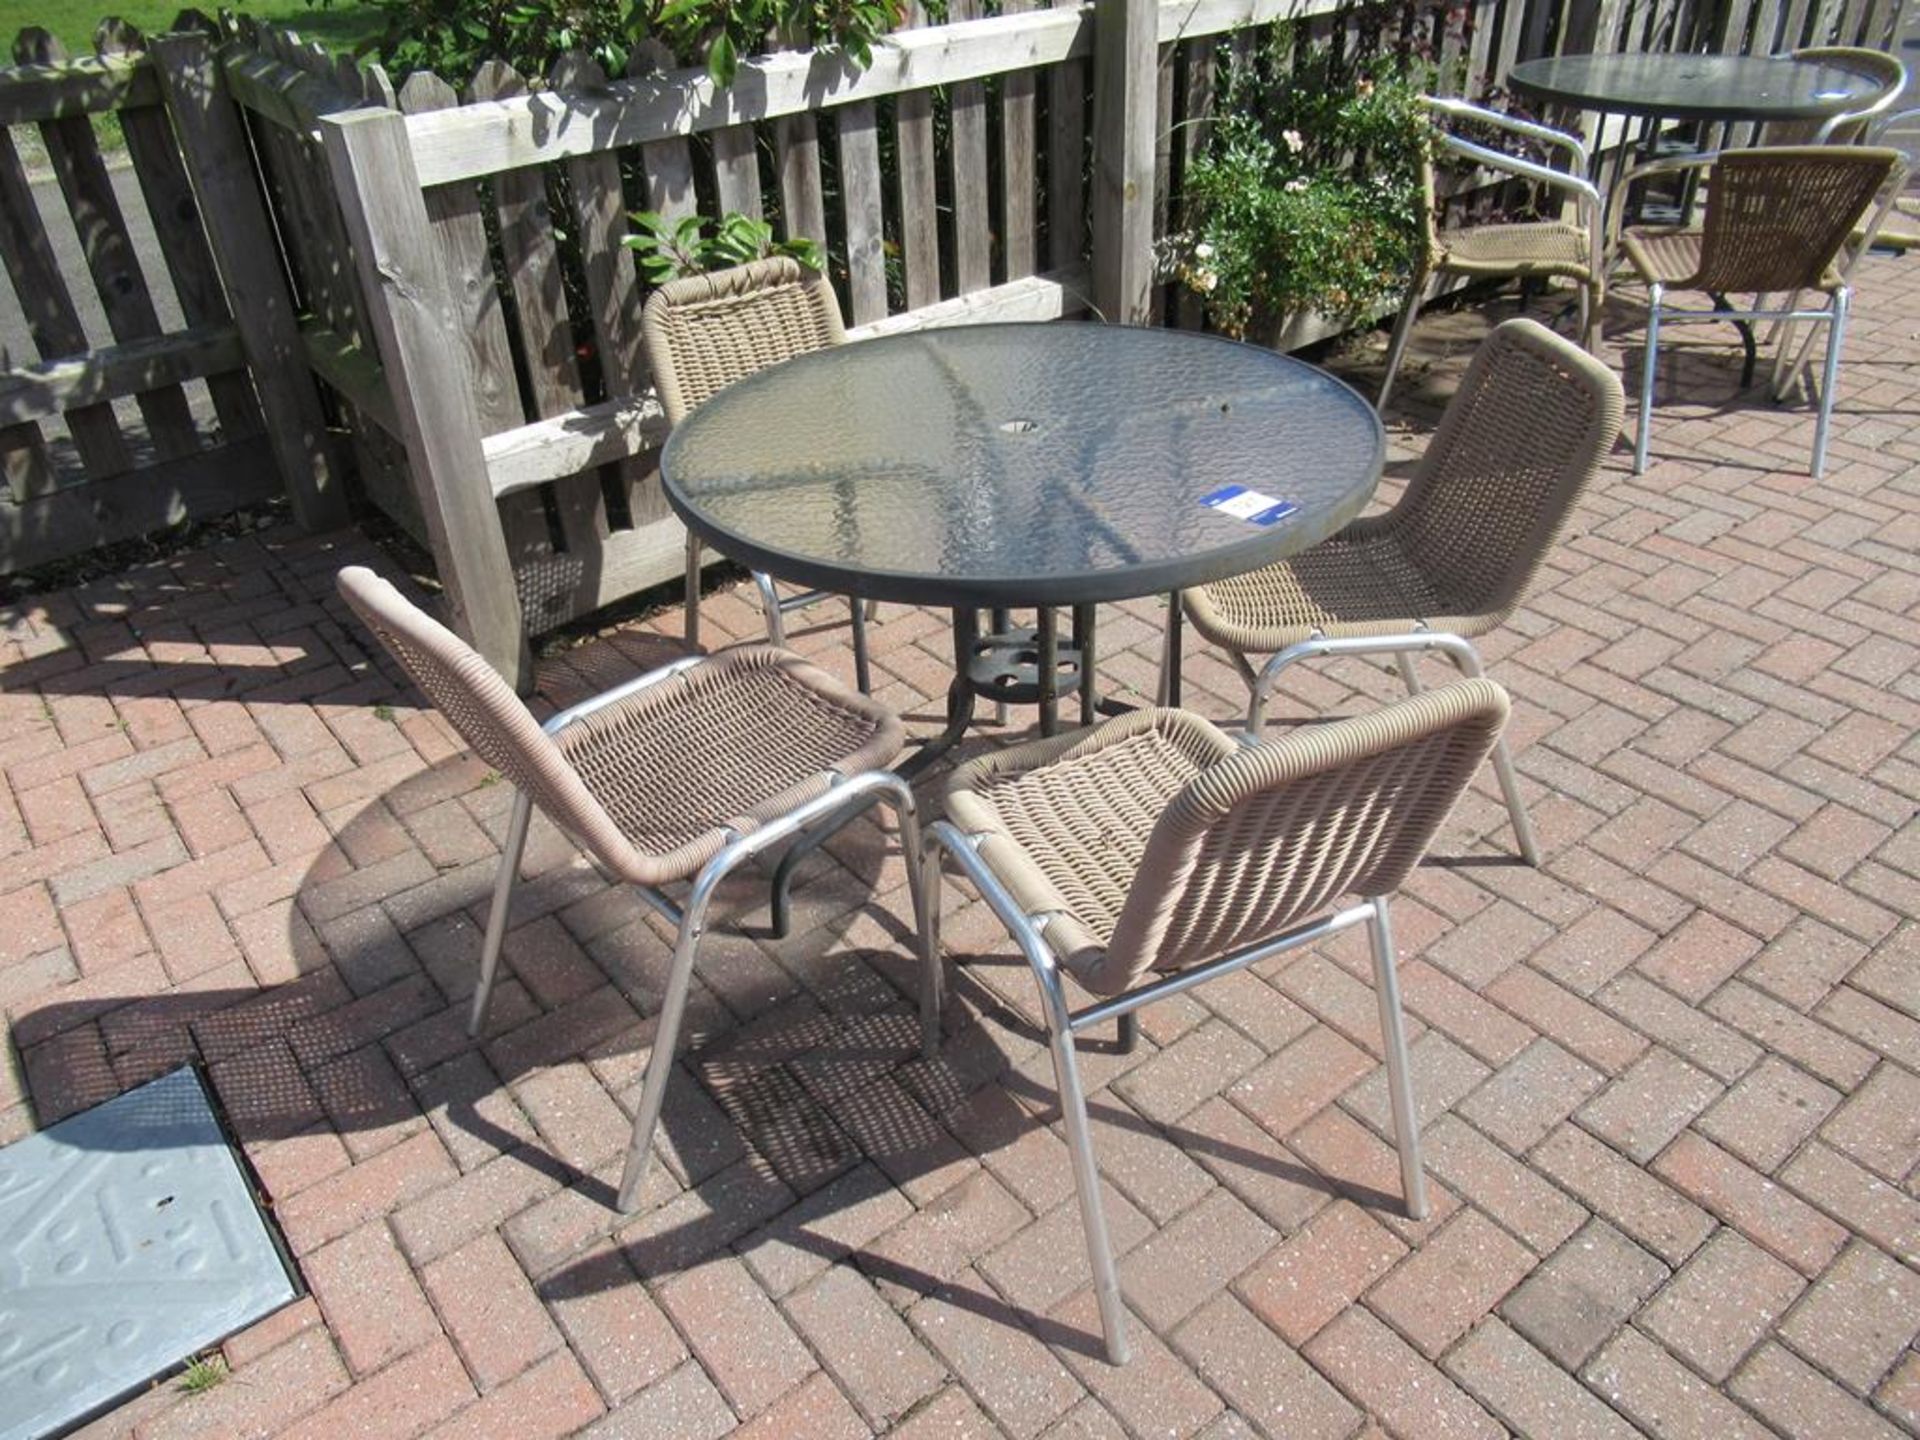 Metal Framed Circular Glass Top Garden Table and 4 x Matching Metal Framed Garden Chairs - Image 2 of 4